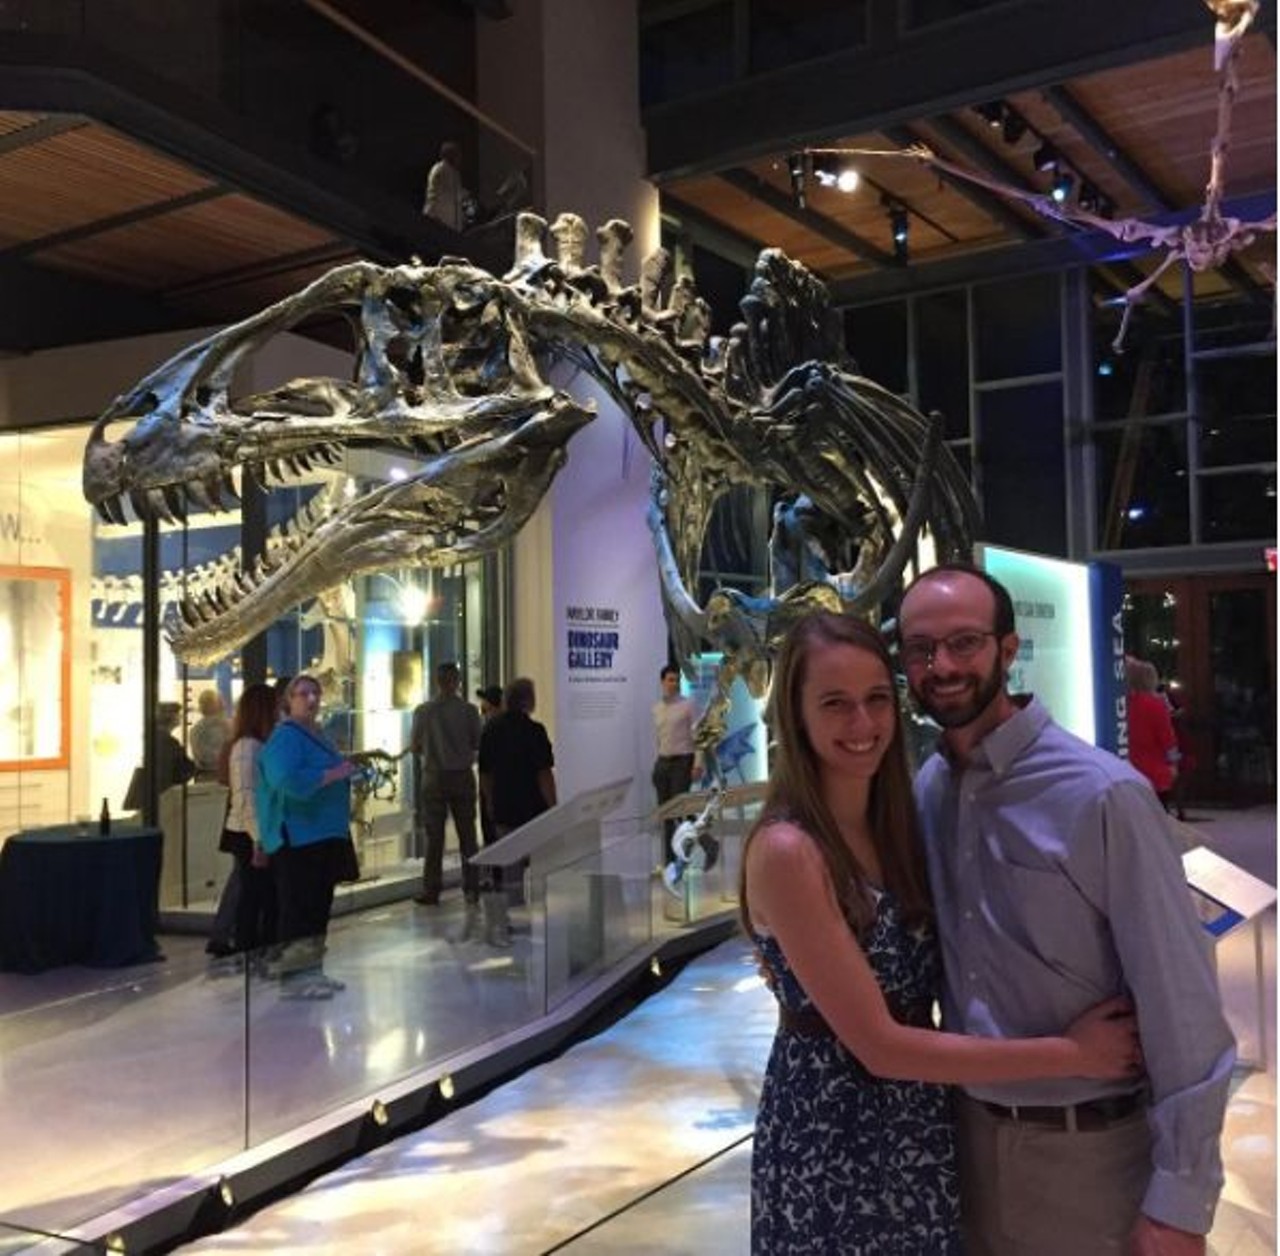 Explore The Witte Museum for free on Tuesdays
3801 Broadway St, (210) 357-1900, wittemuseum.org
The couples that learn together, stay together.
Photo via Instagram, s.franklin12